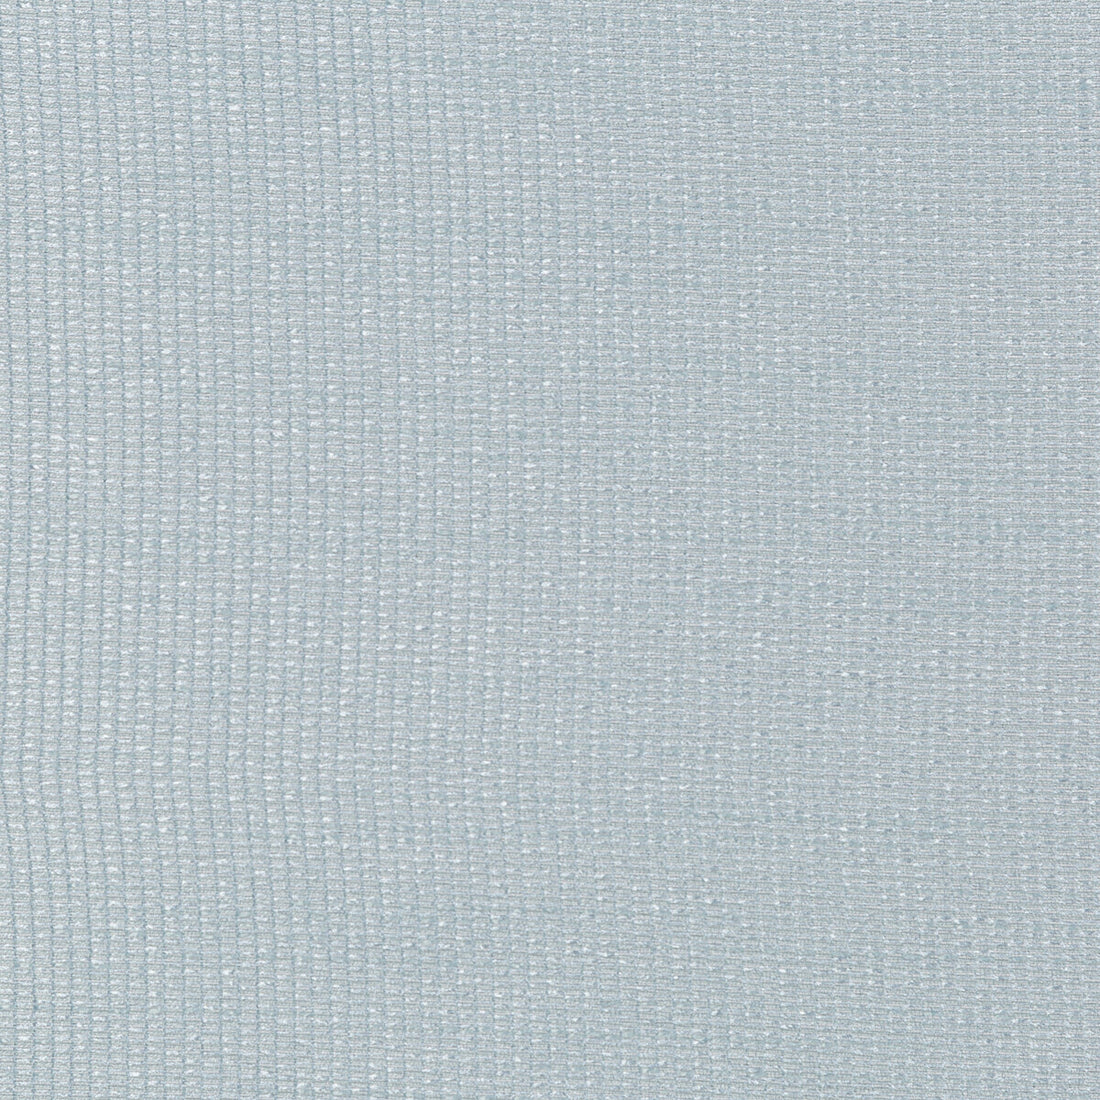 Hadley fabric in sail color - pattern 4652.15.0 - by Kravet Contract